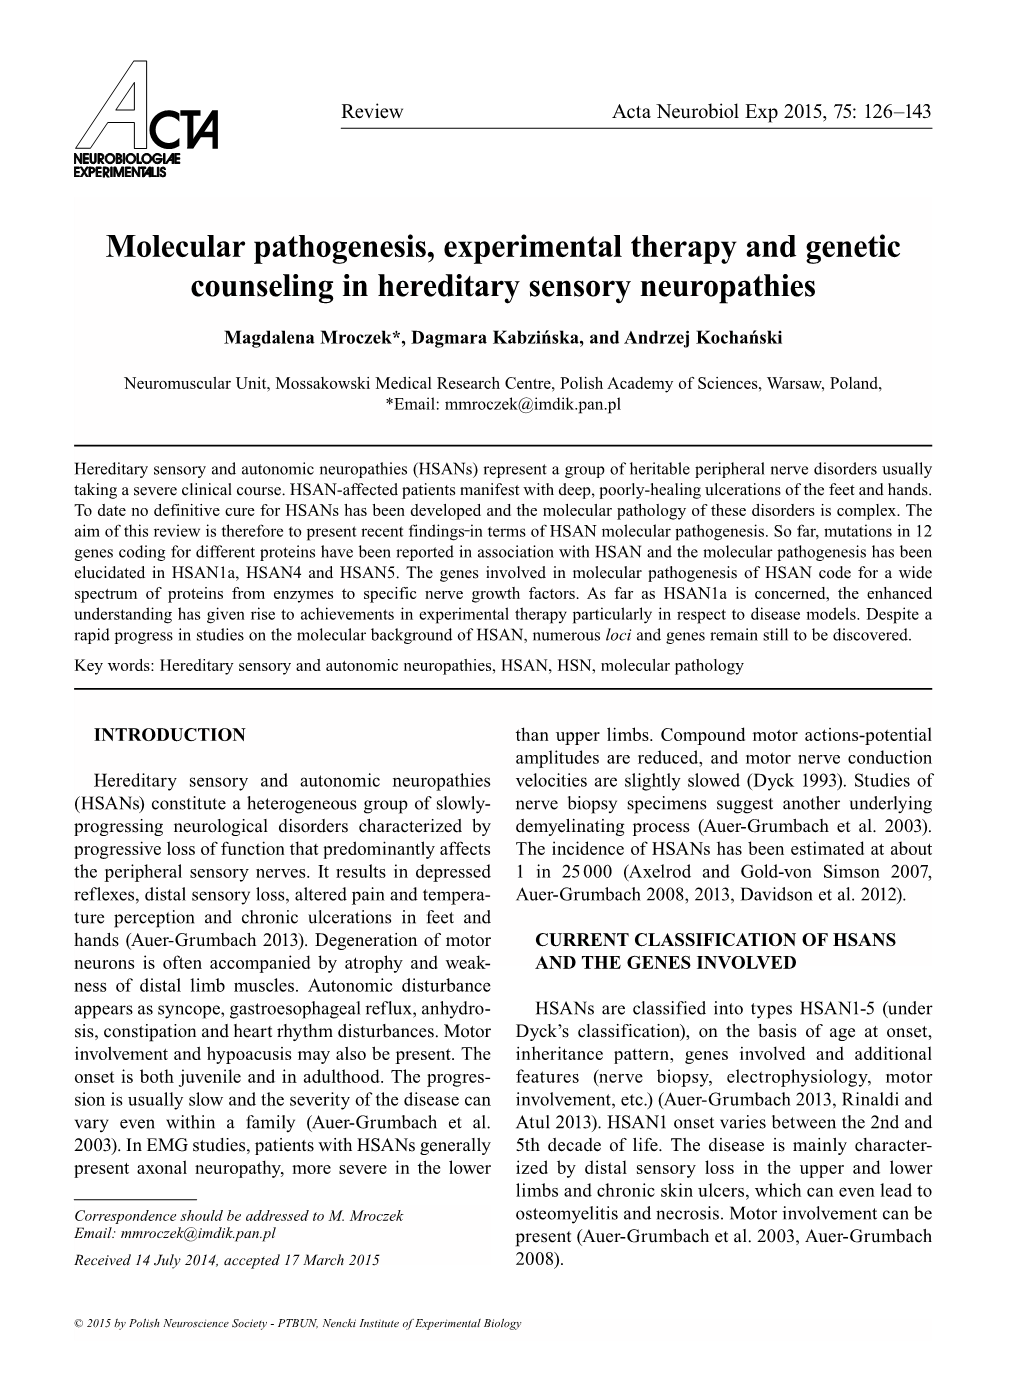 Molecular Pathogenesis, Experimental Therapy and Genetic Counseling in Hereditary Sensory Neuropathies